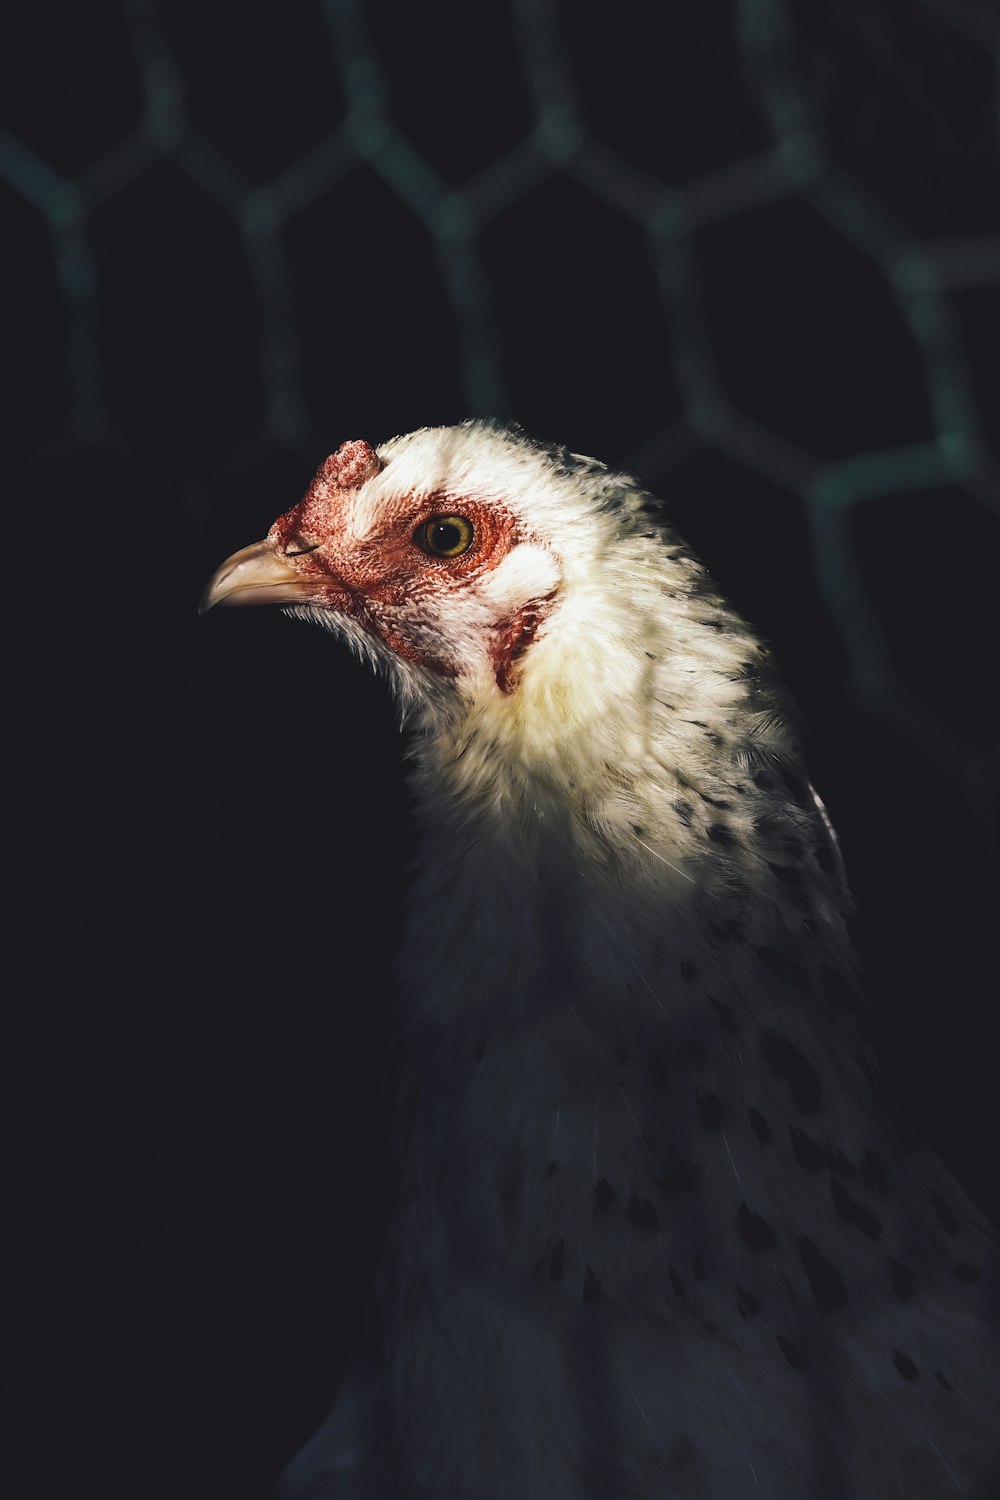 white and black chick in close up photography